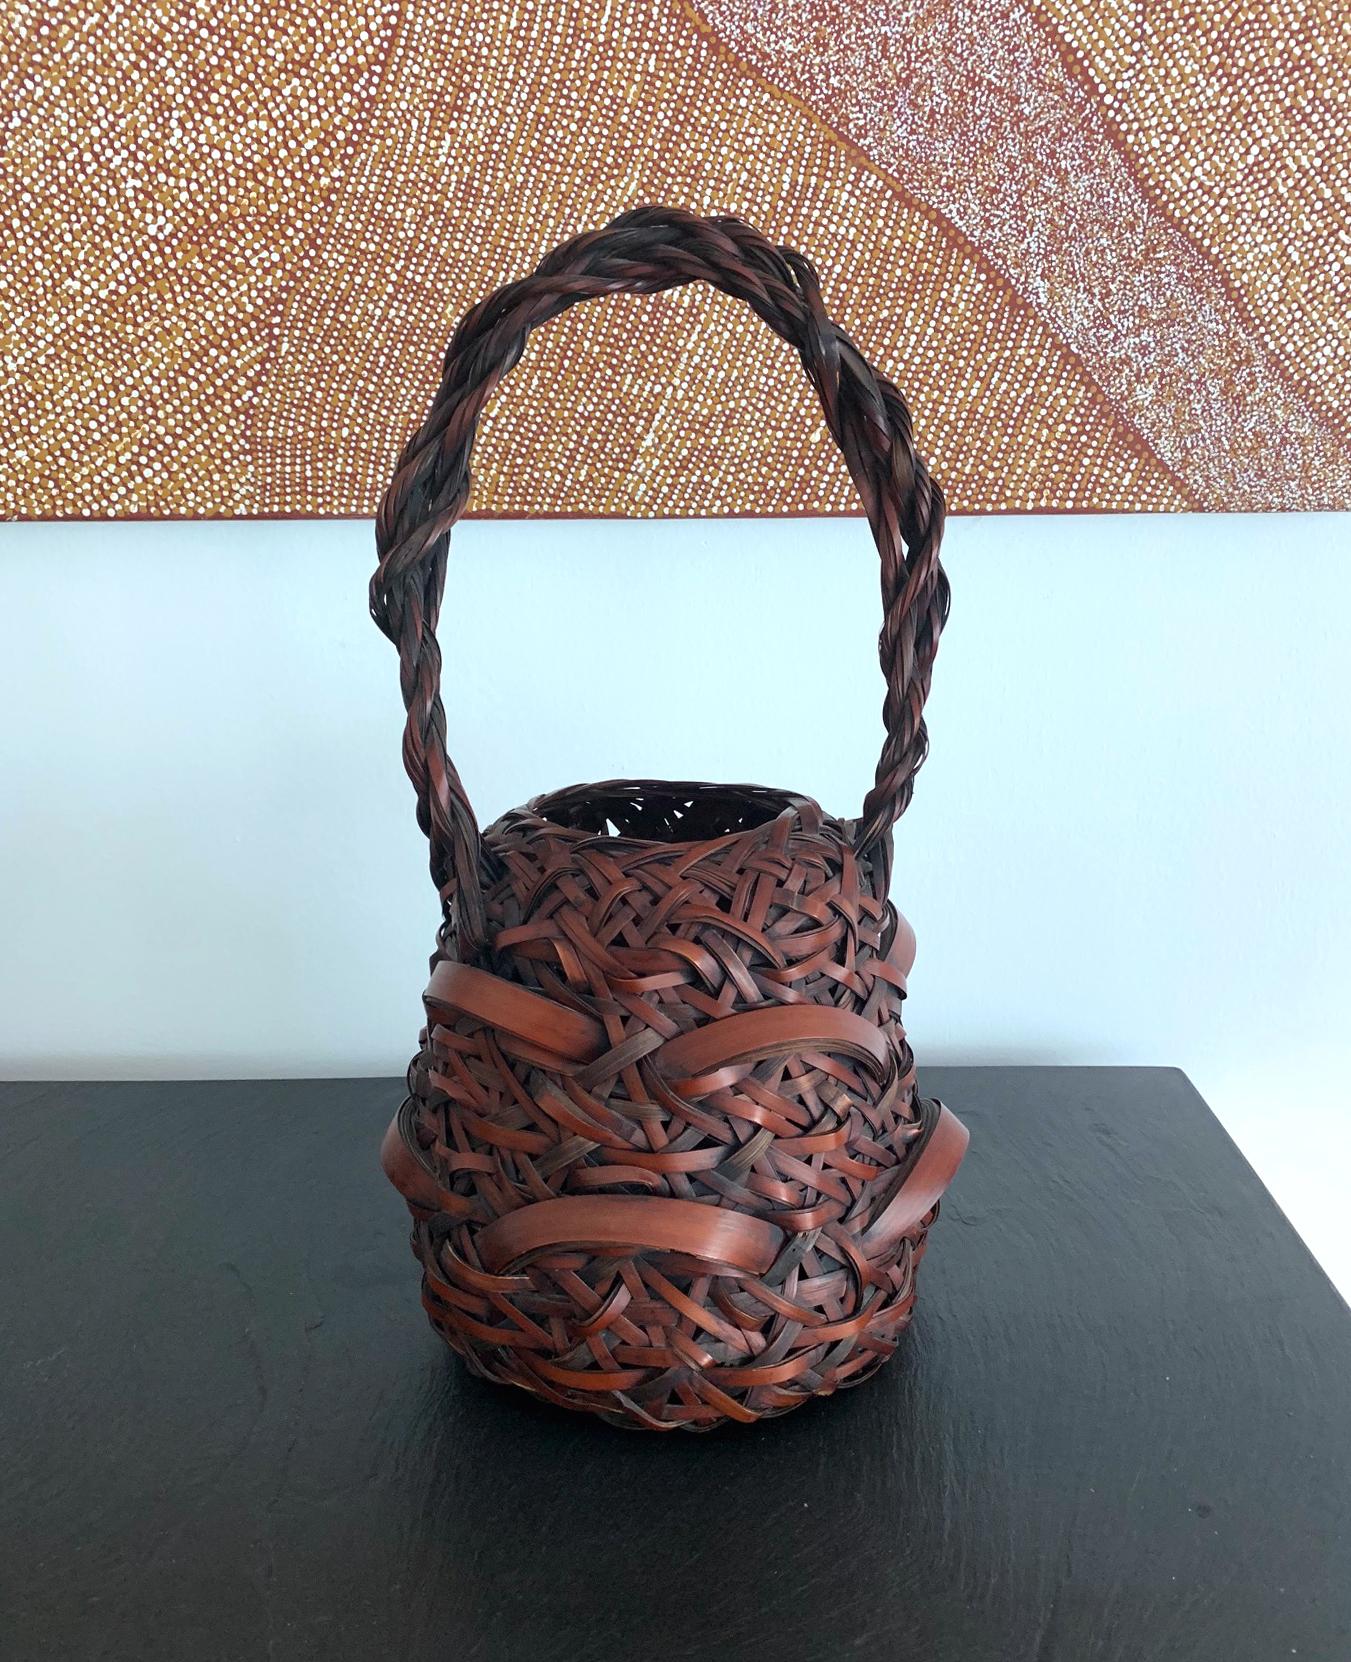 Bold, rustic and with an earthy free spirit, this wagumi style flower basket (ikebana) was designed and woven to evoke a sense of serenity an humbleness during the tea ceremony. Woven in a rather solid shape with an illusion of heavier mass, thinner